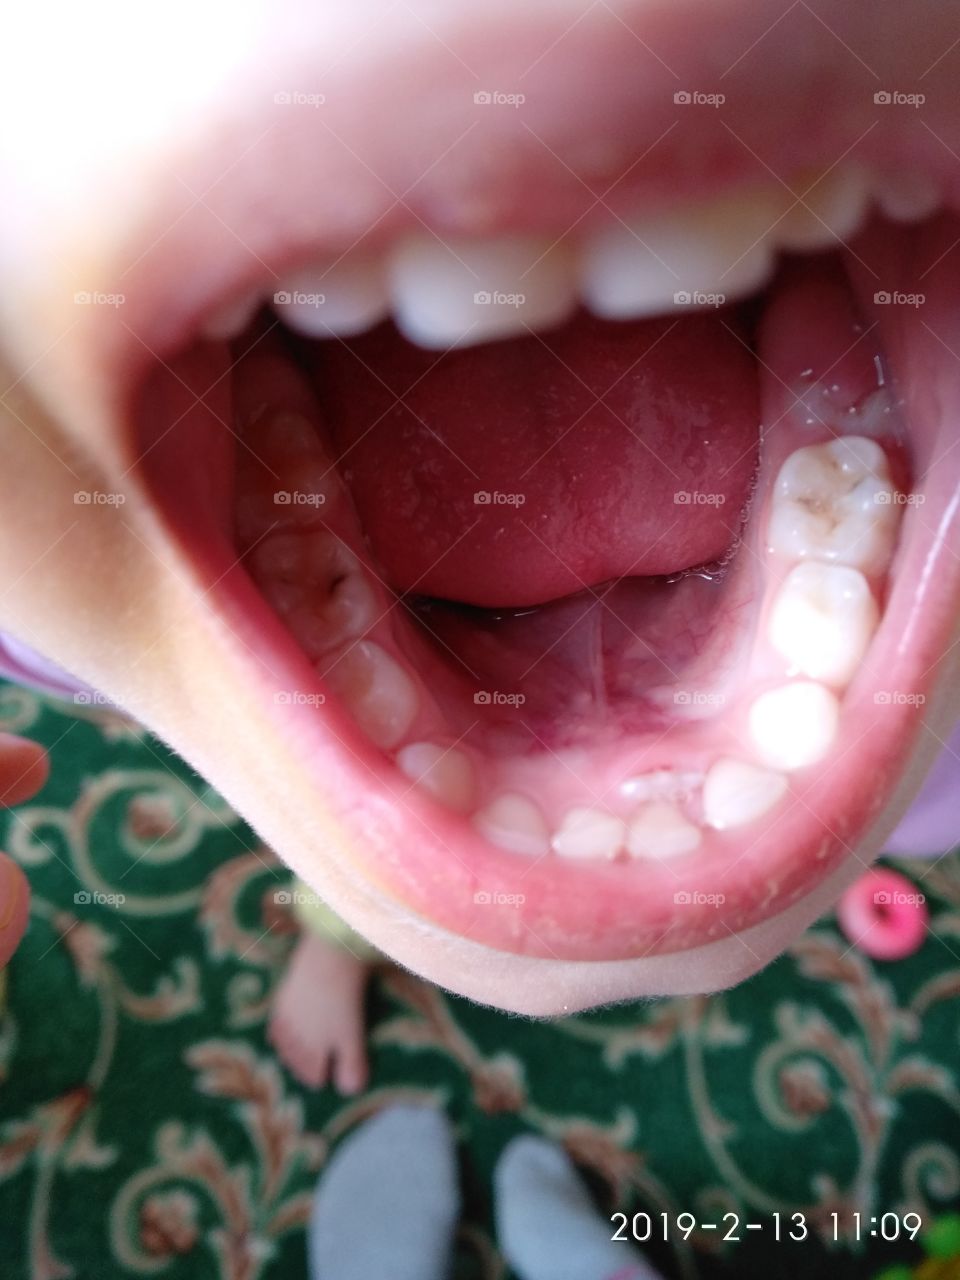 Do you see the first real  teeth?